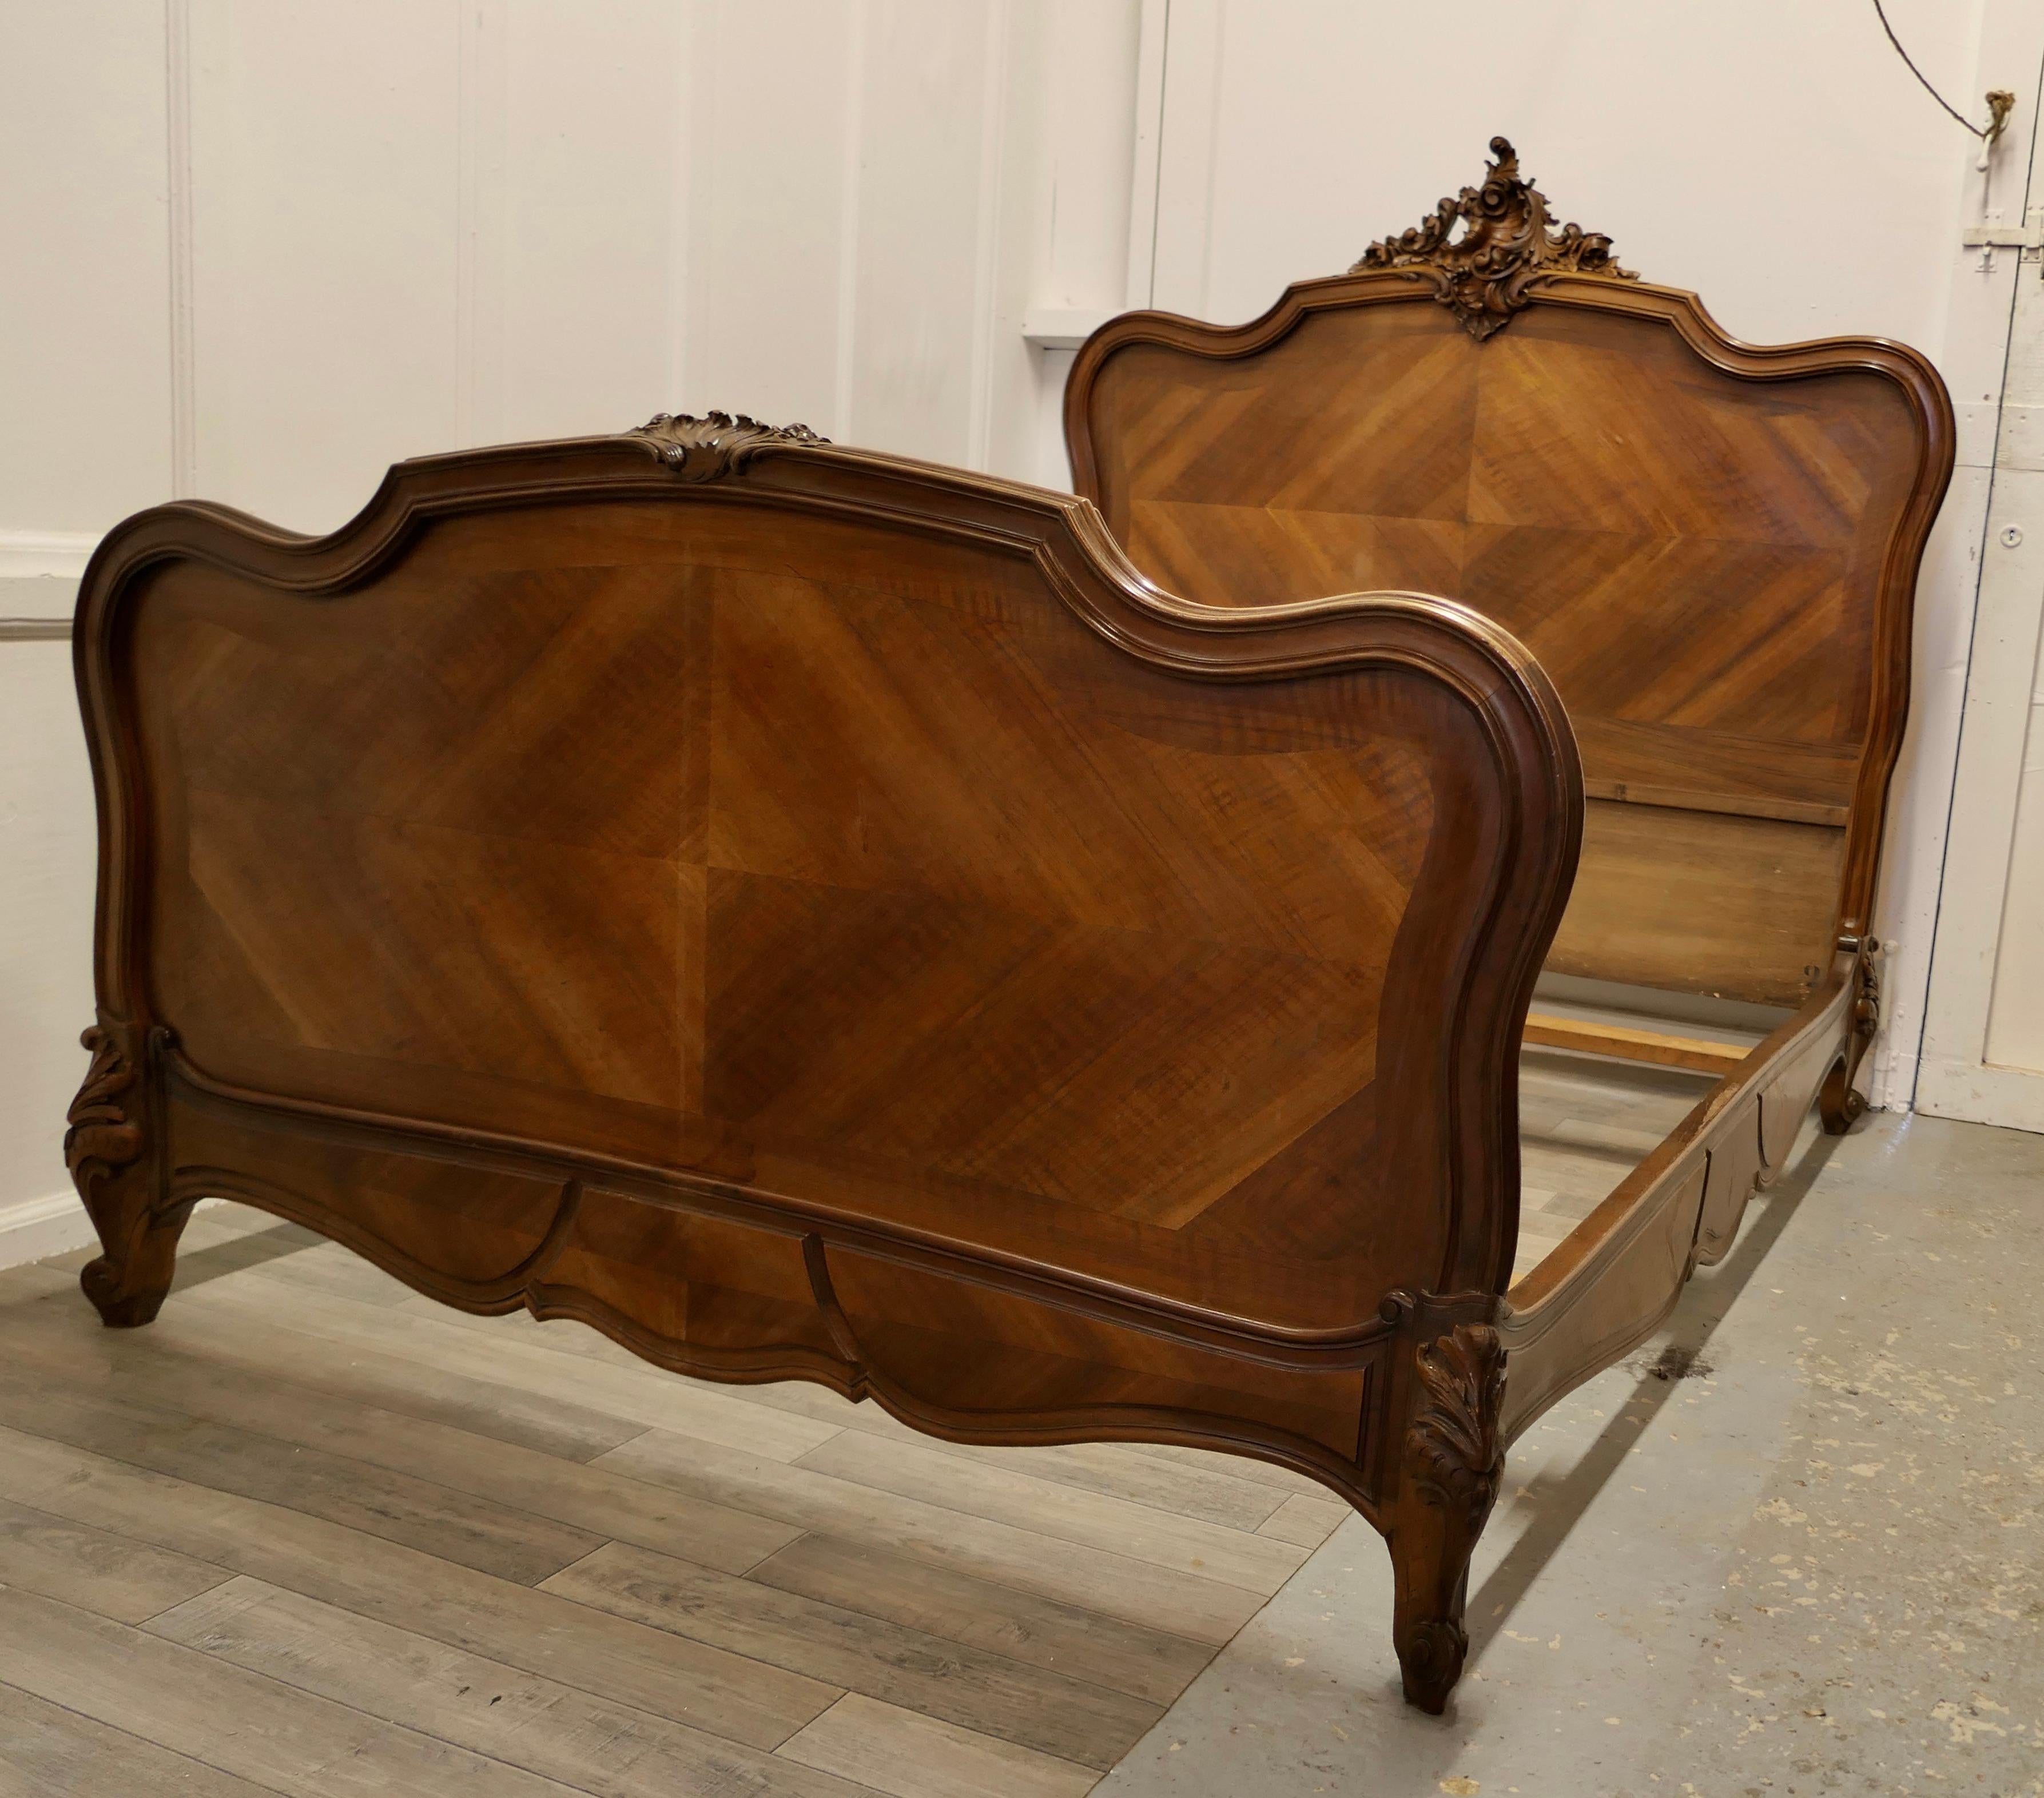 Louis XV Style French golden walnut bed

The bed is made in quarter veneered walnut and has a superbly carved crest on the headboard, the carved decoration is repeated on the feet and the footboard 
The bed is in good condition, the internal